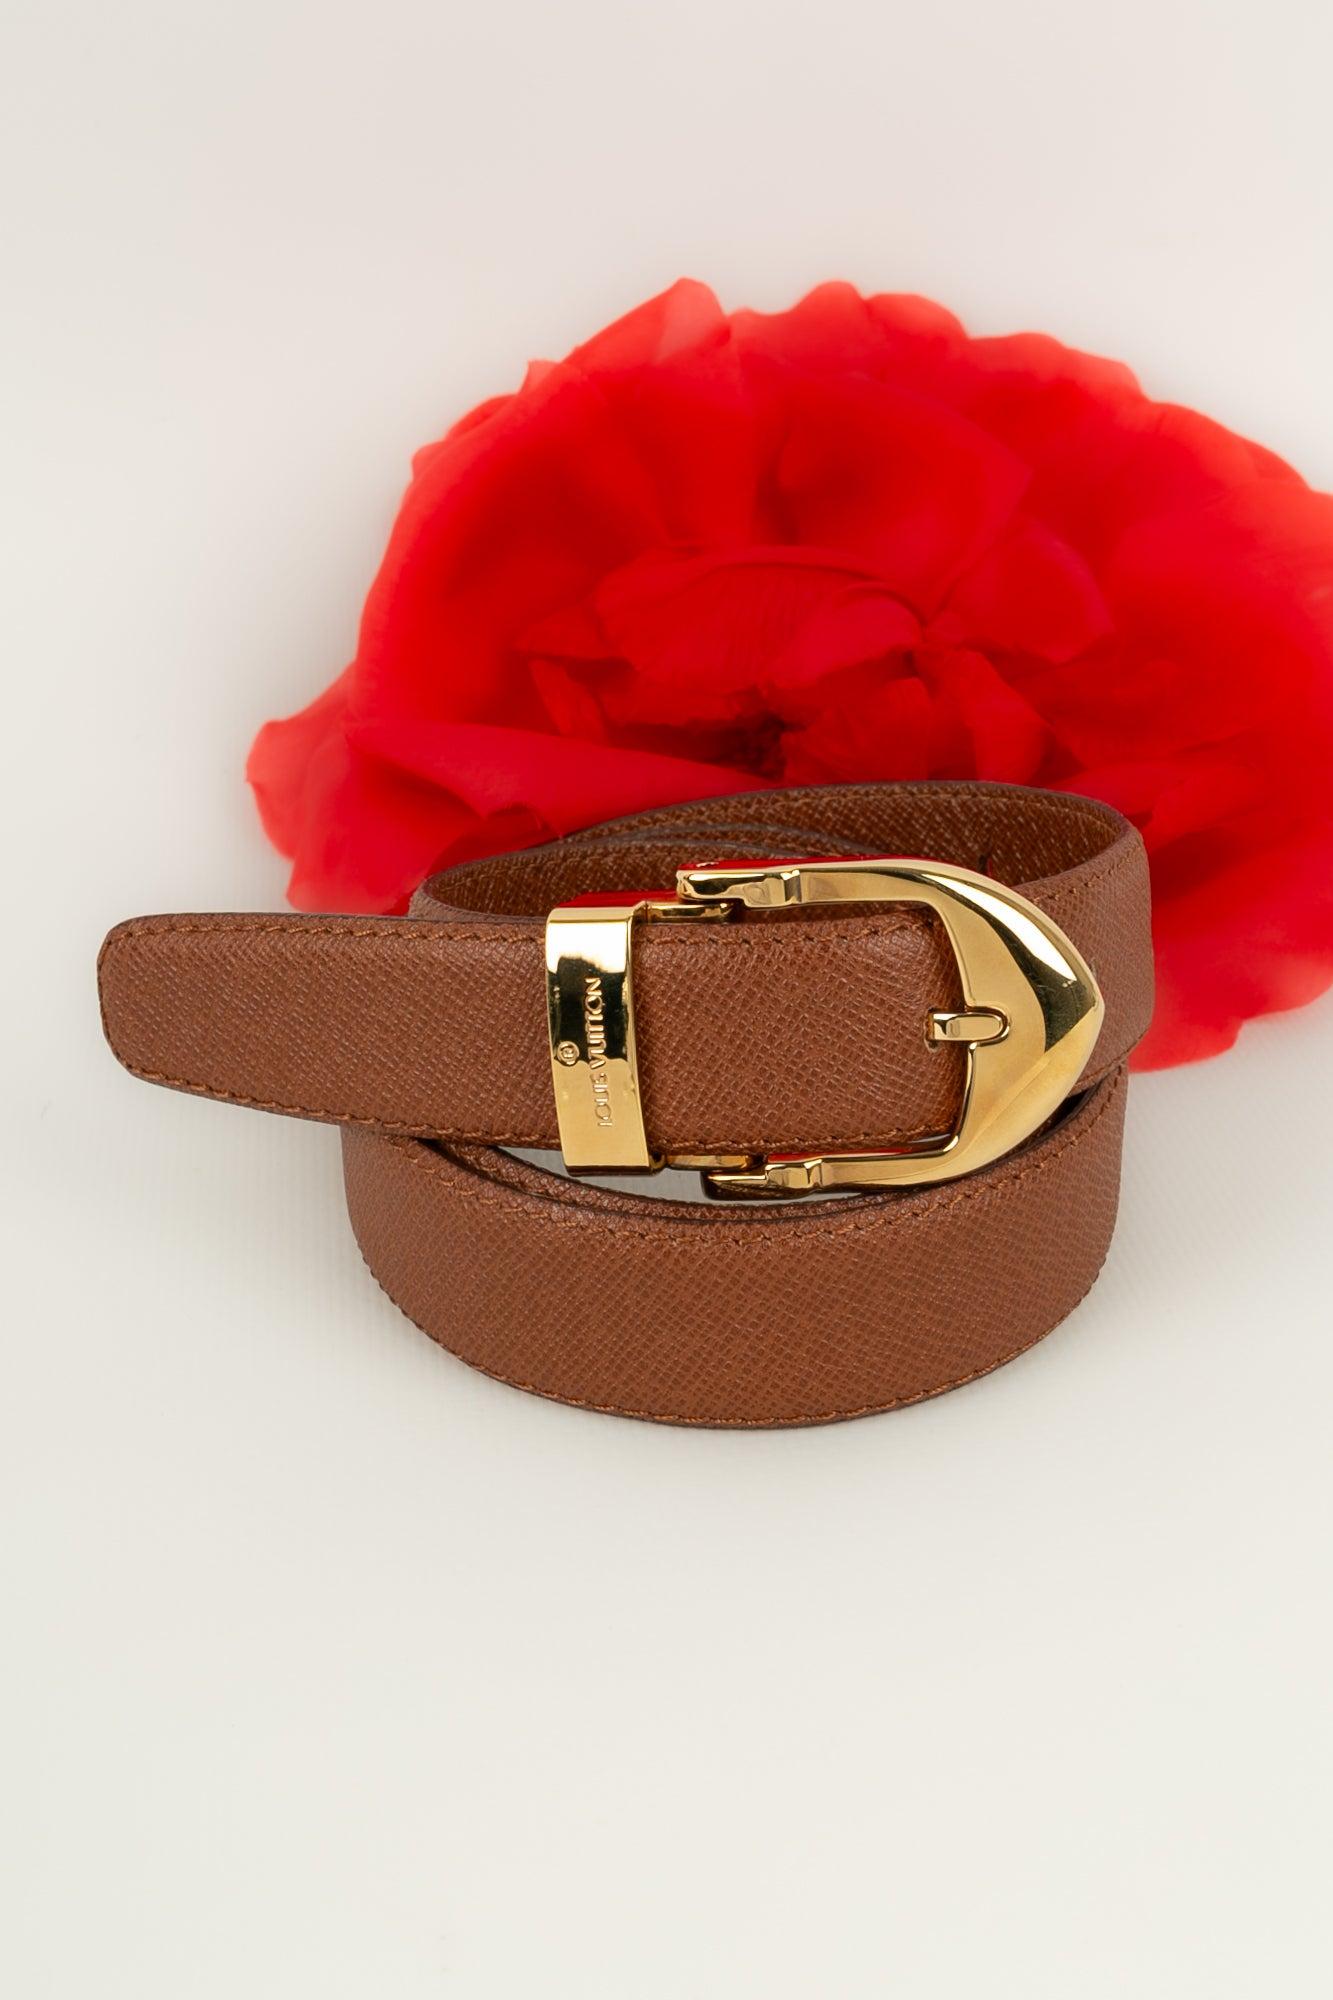 Louis Vuitton - (Made in France) Belt in leather and gold-plated metal.

Additional information:
Condition: Very good condition
Dimensions: Length: from 74 cm to 84 cm

Seller Reference: ACC94